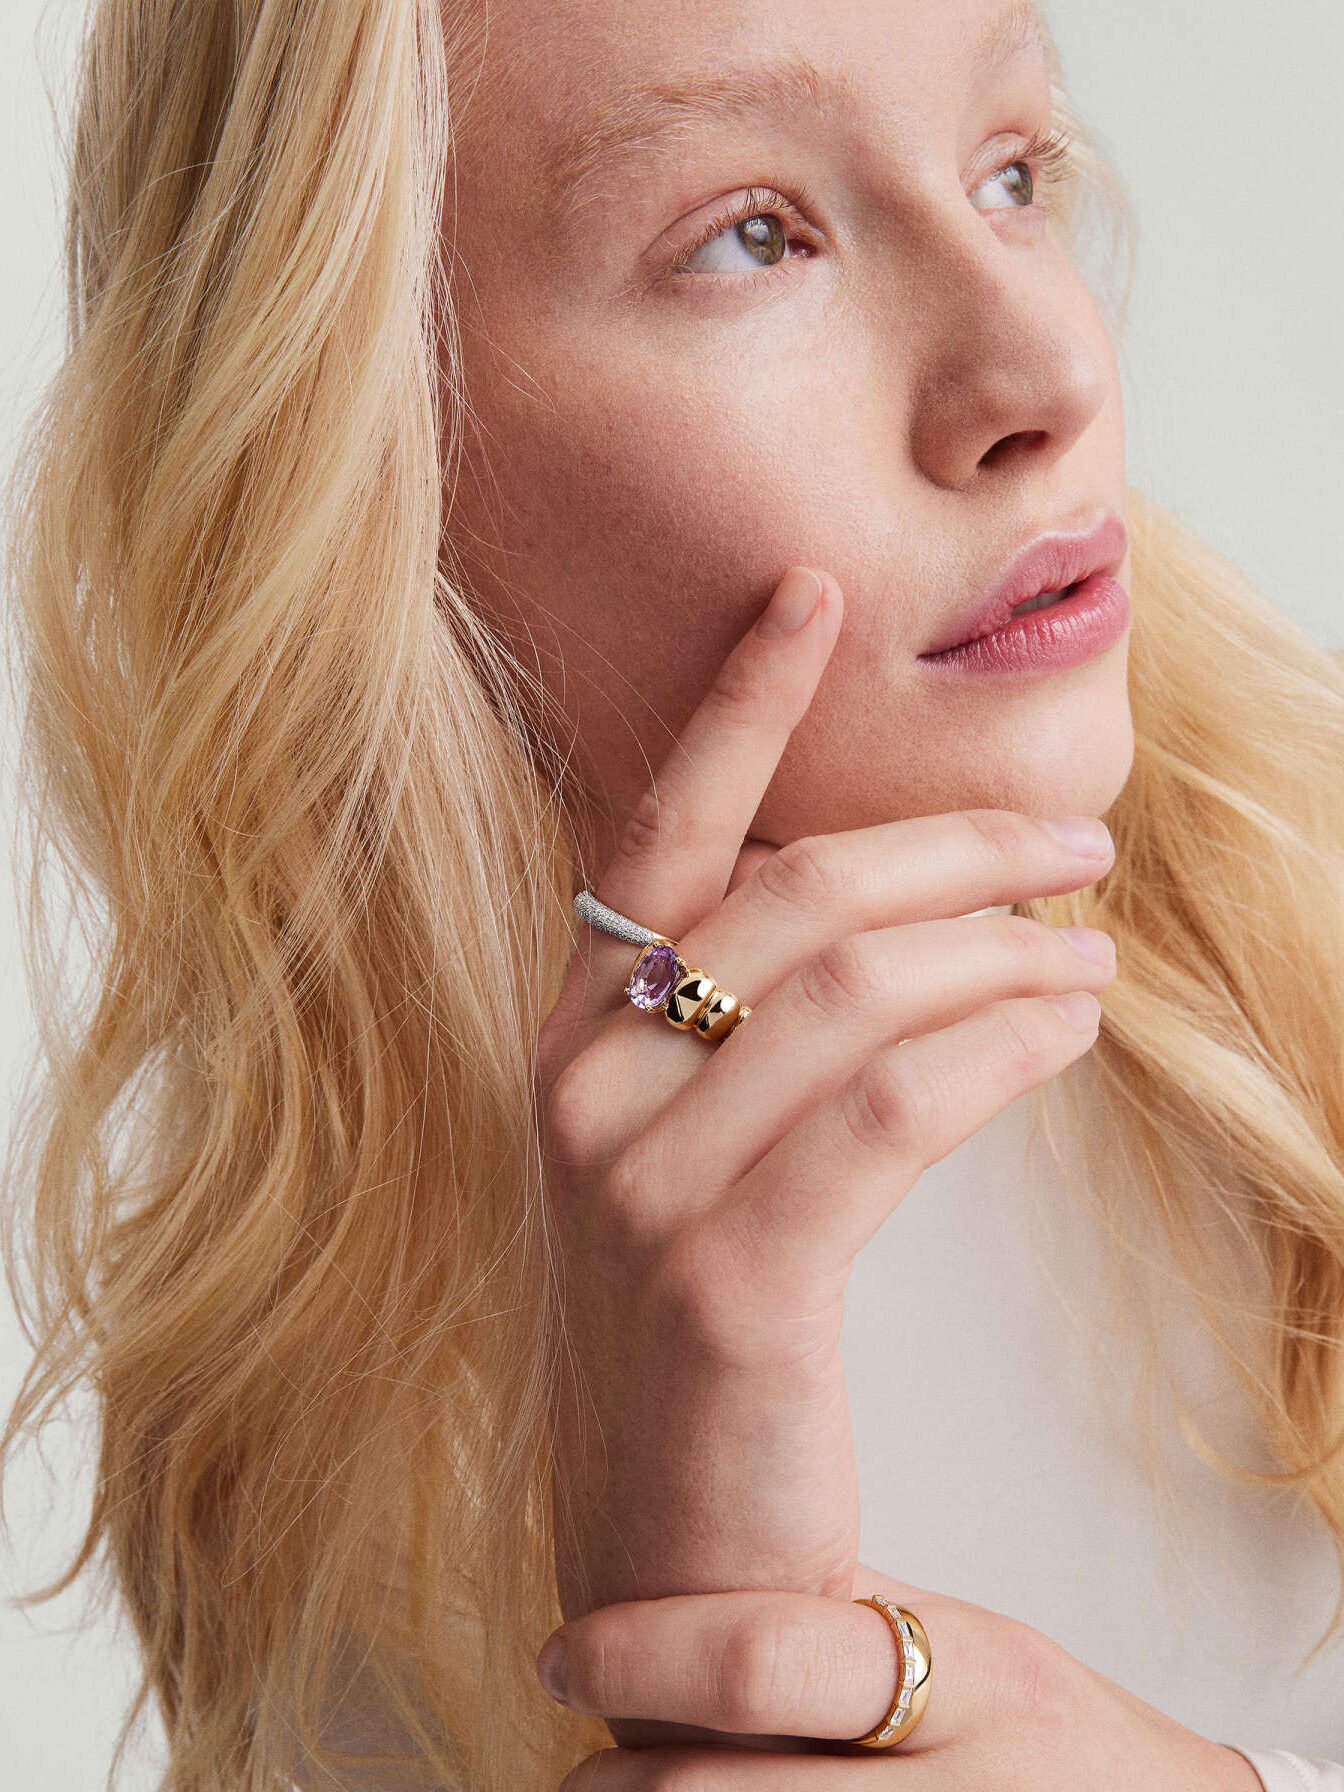 A woman with blonde hair showcasing a purple gemstone ring.